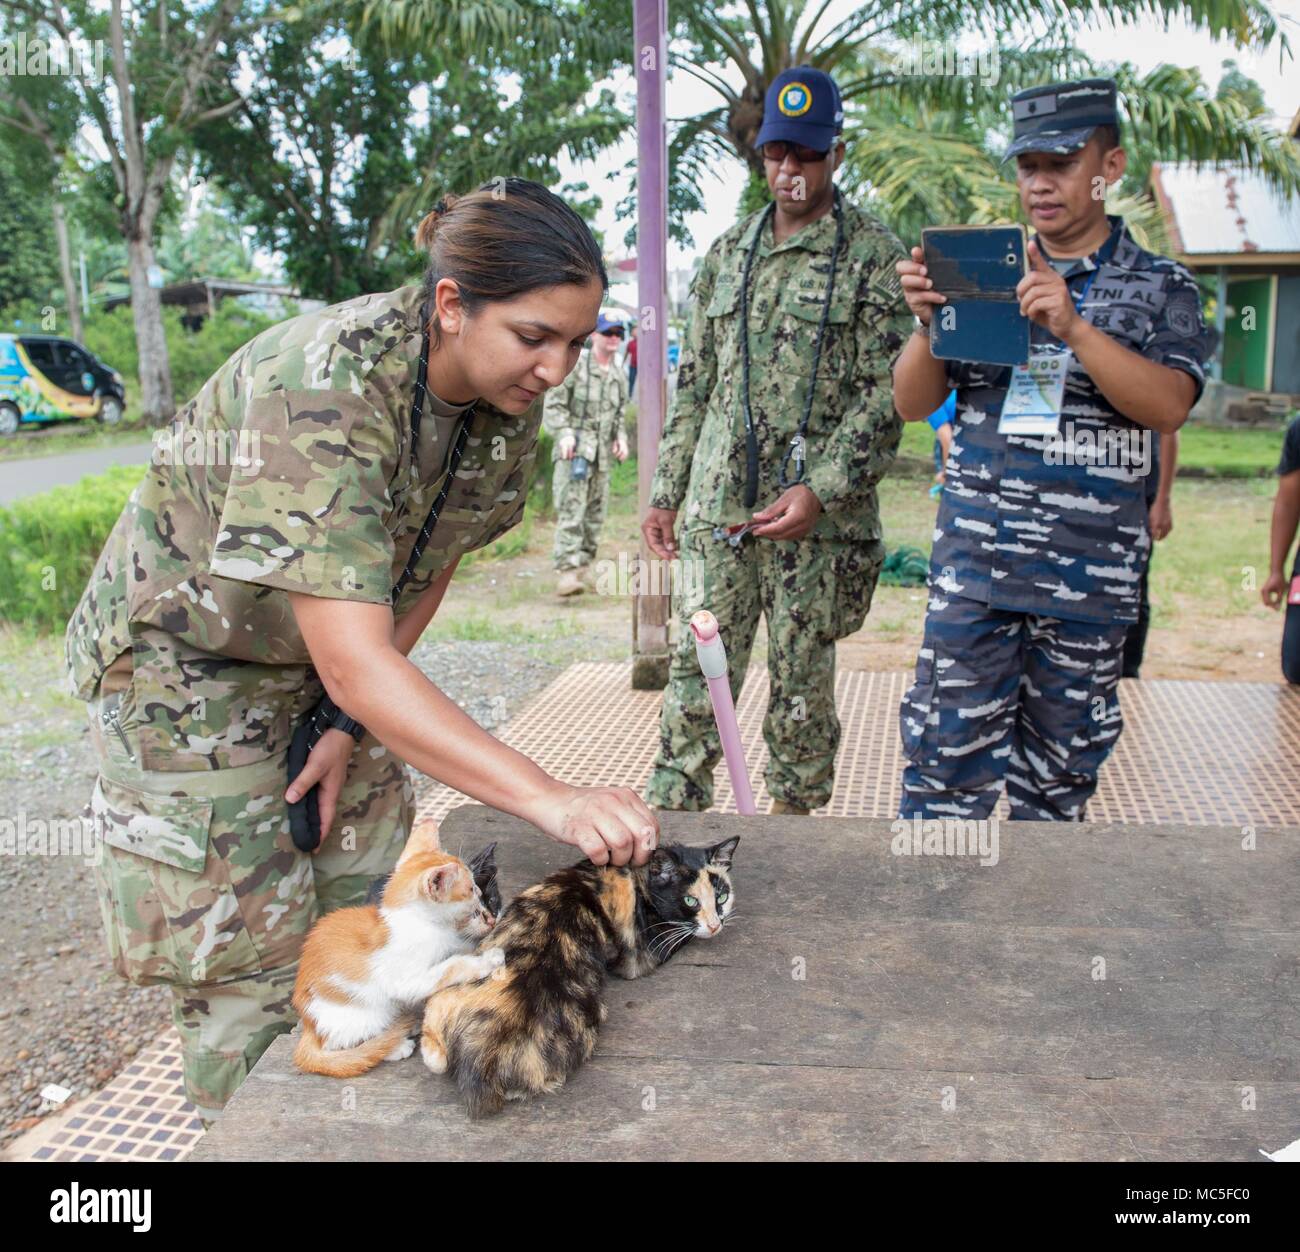 180404-N-MD713-0045  BENGKULU, Indonesia (April 4, 2018) Army Spc. Toni Weaver (left), from Castroville, Texas, who is currently assigned to Military Sealift Command hospital ship USNS Mercy (T-AH 19,) demonstrates proper feline handling techniques during a rabies vaccination event.  Weaver and other service members are currently deployed in support of Pacific Partnership 2018. PP18’s mission is to work collectively with host and partner nations to enhance regional interoperability and disaster response capabilities, increase stability and security in the region, and foster new and enduring fr Stock Photo